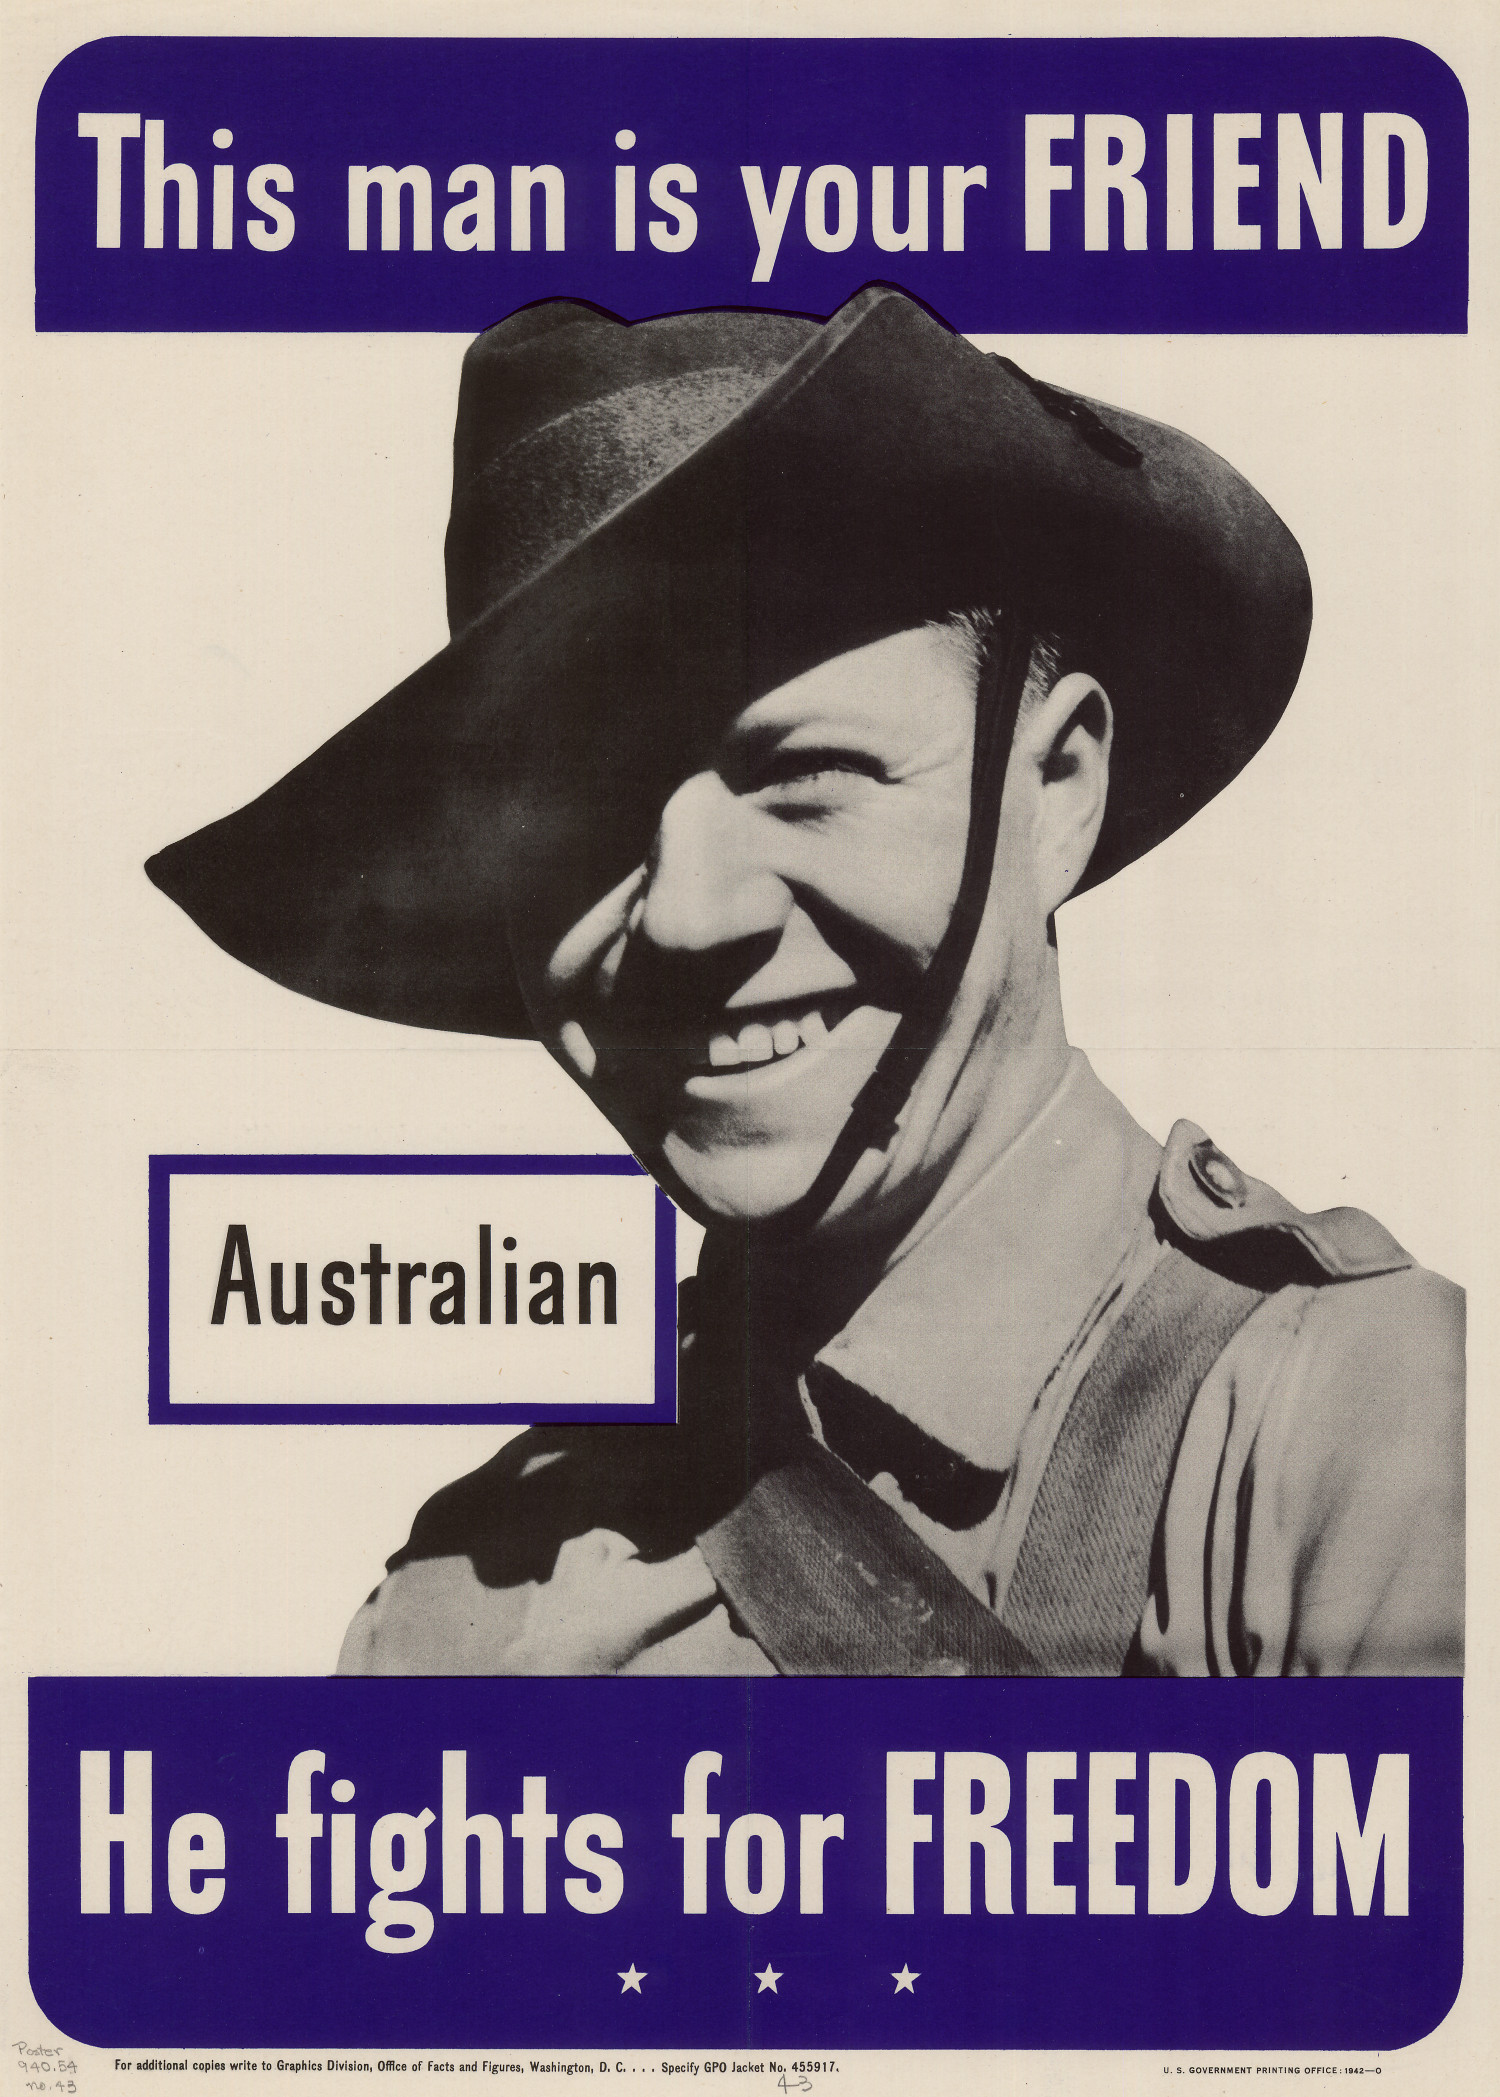 This man is your friend : Australian : he fights for freedom. - UNT